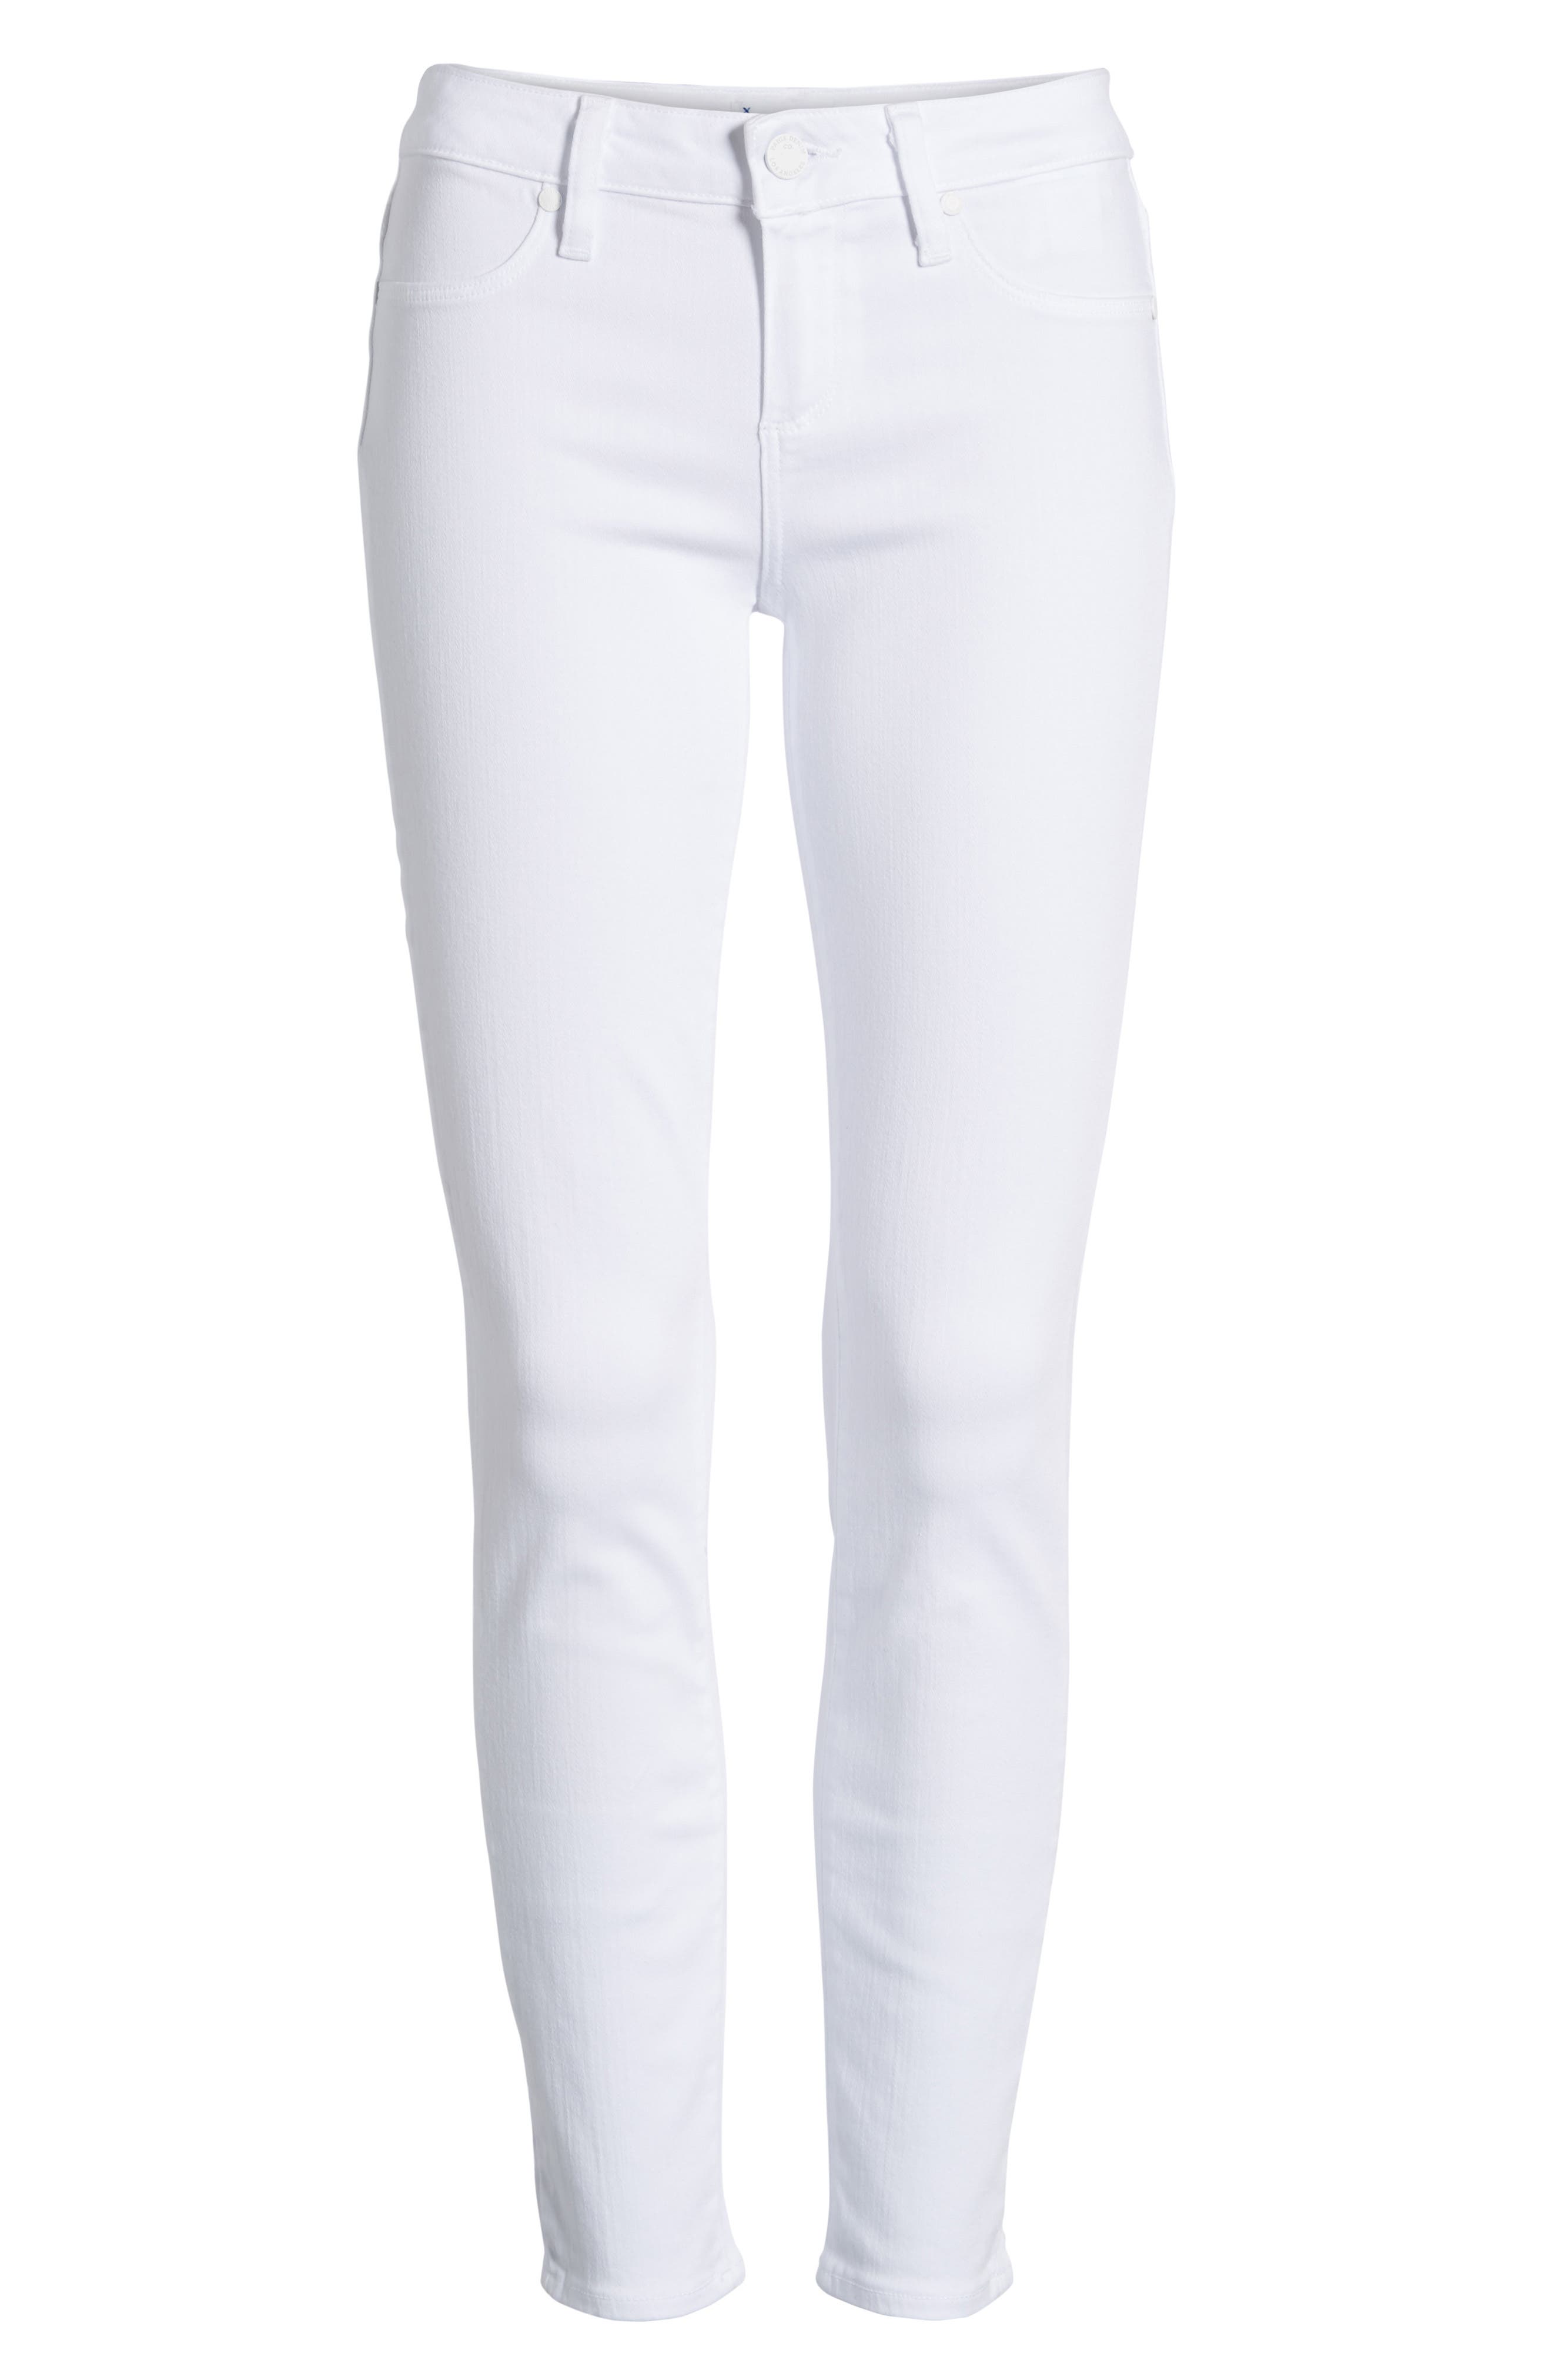 paige white jeans nordstrom rack